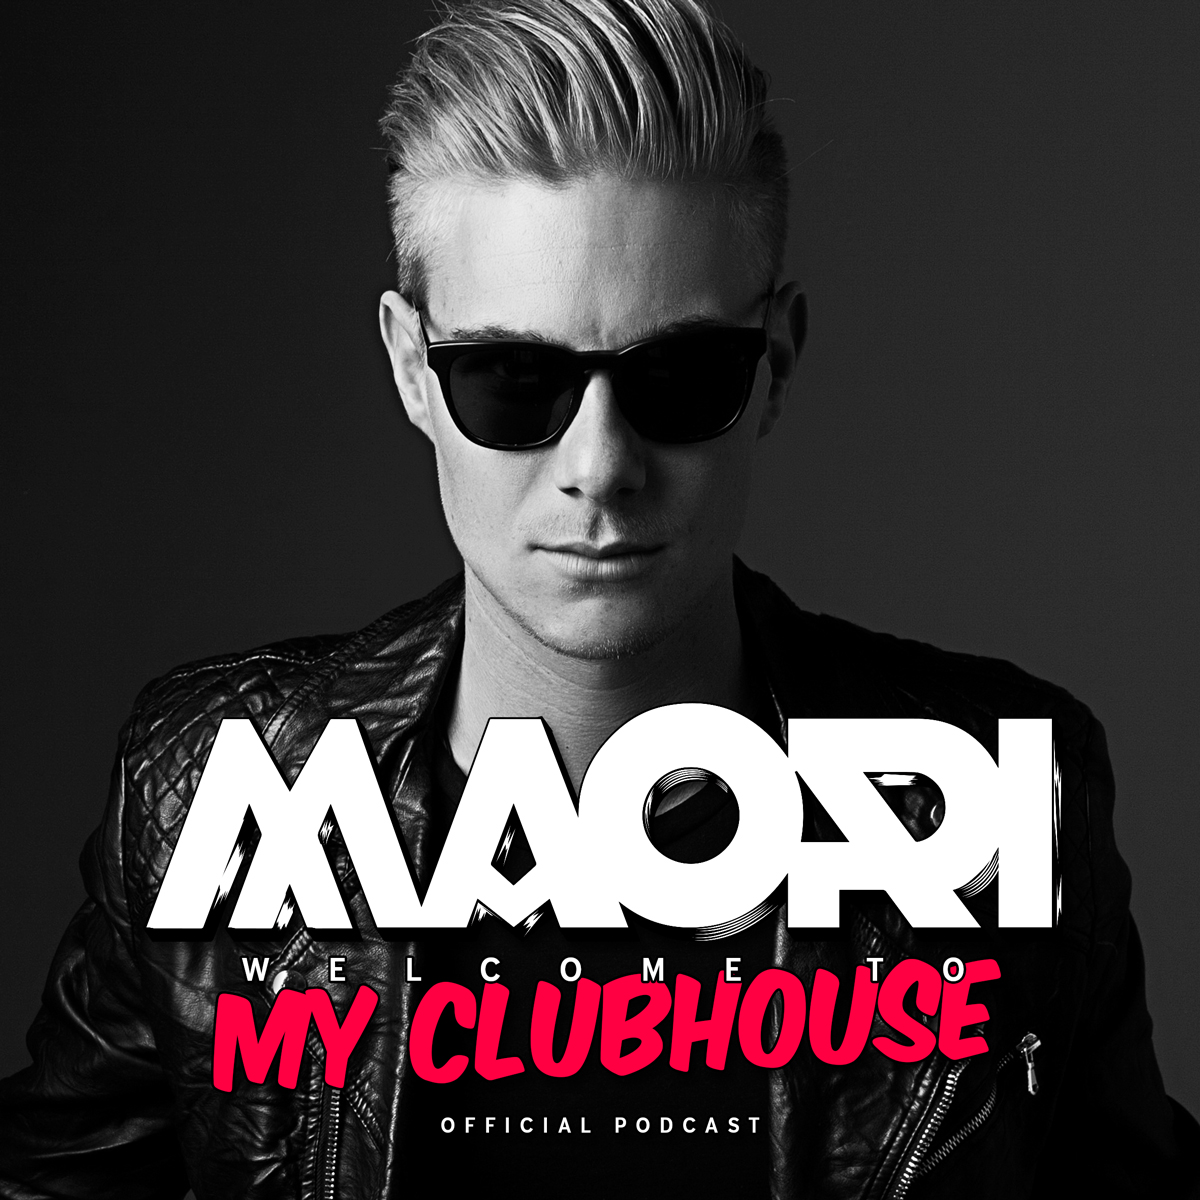 My Clubhouse by Maori - Podcast #044